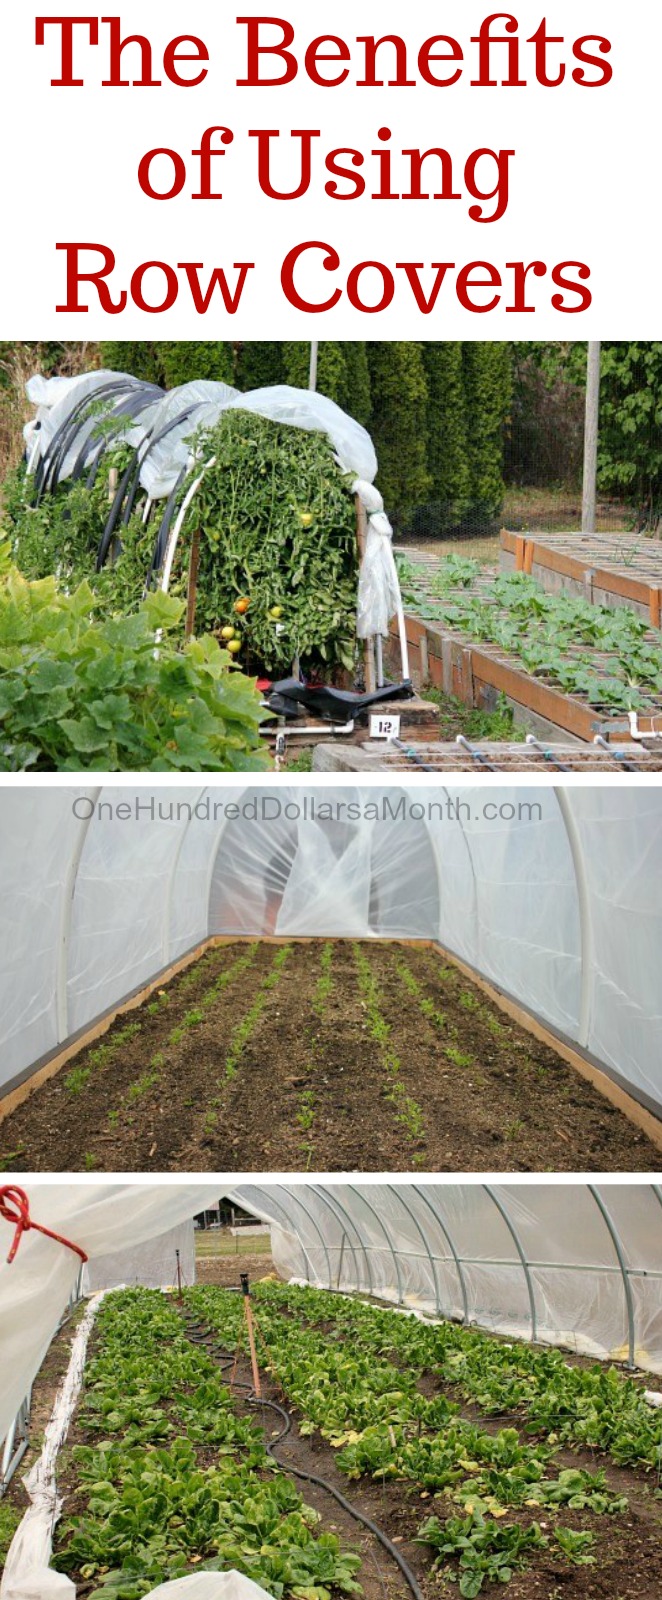 The Benefits of Using Row Covers